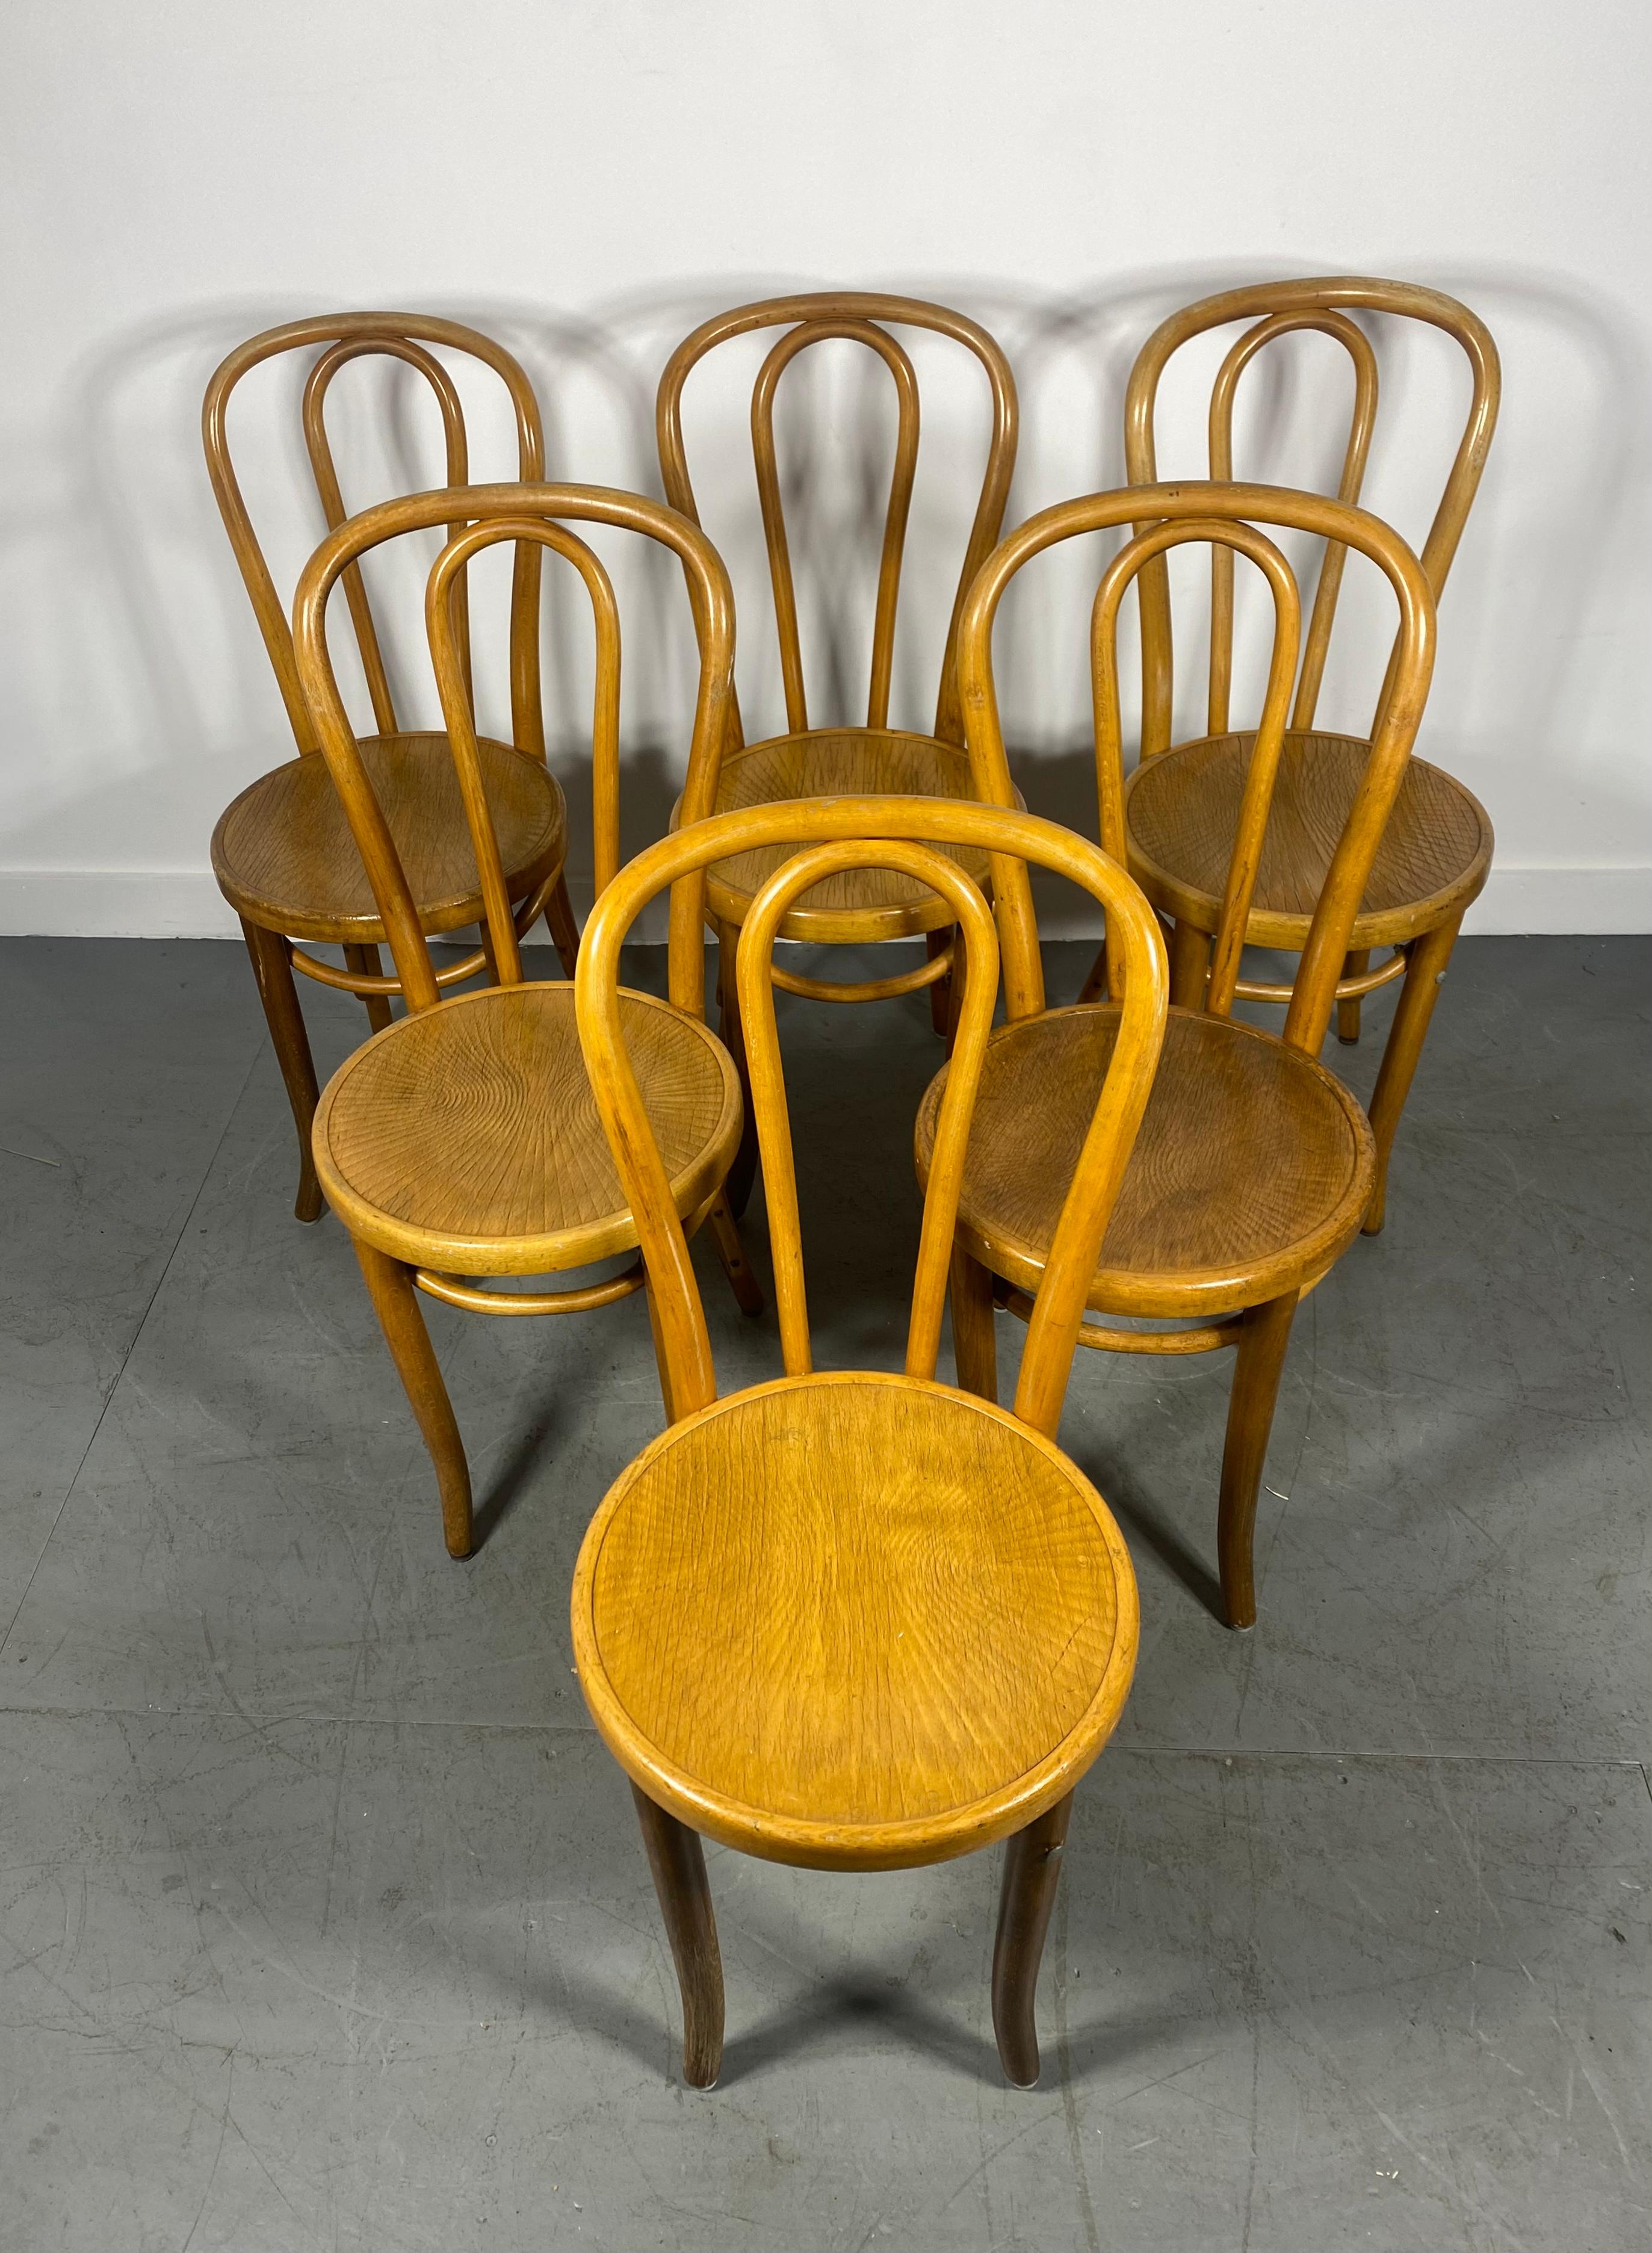 Classic set 6 Thonet Bentwood Dining /Bistro chairs, model # 18.Labeled Made in Czechoslovakia.Nuce clean matched set, Retains original warm honey blonde finish,,wonderful patina. Two chairs reinforced (bolt ). see photo. Structurally sound, tight,